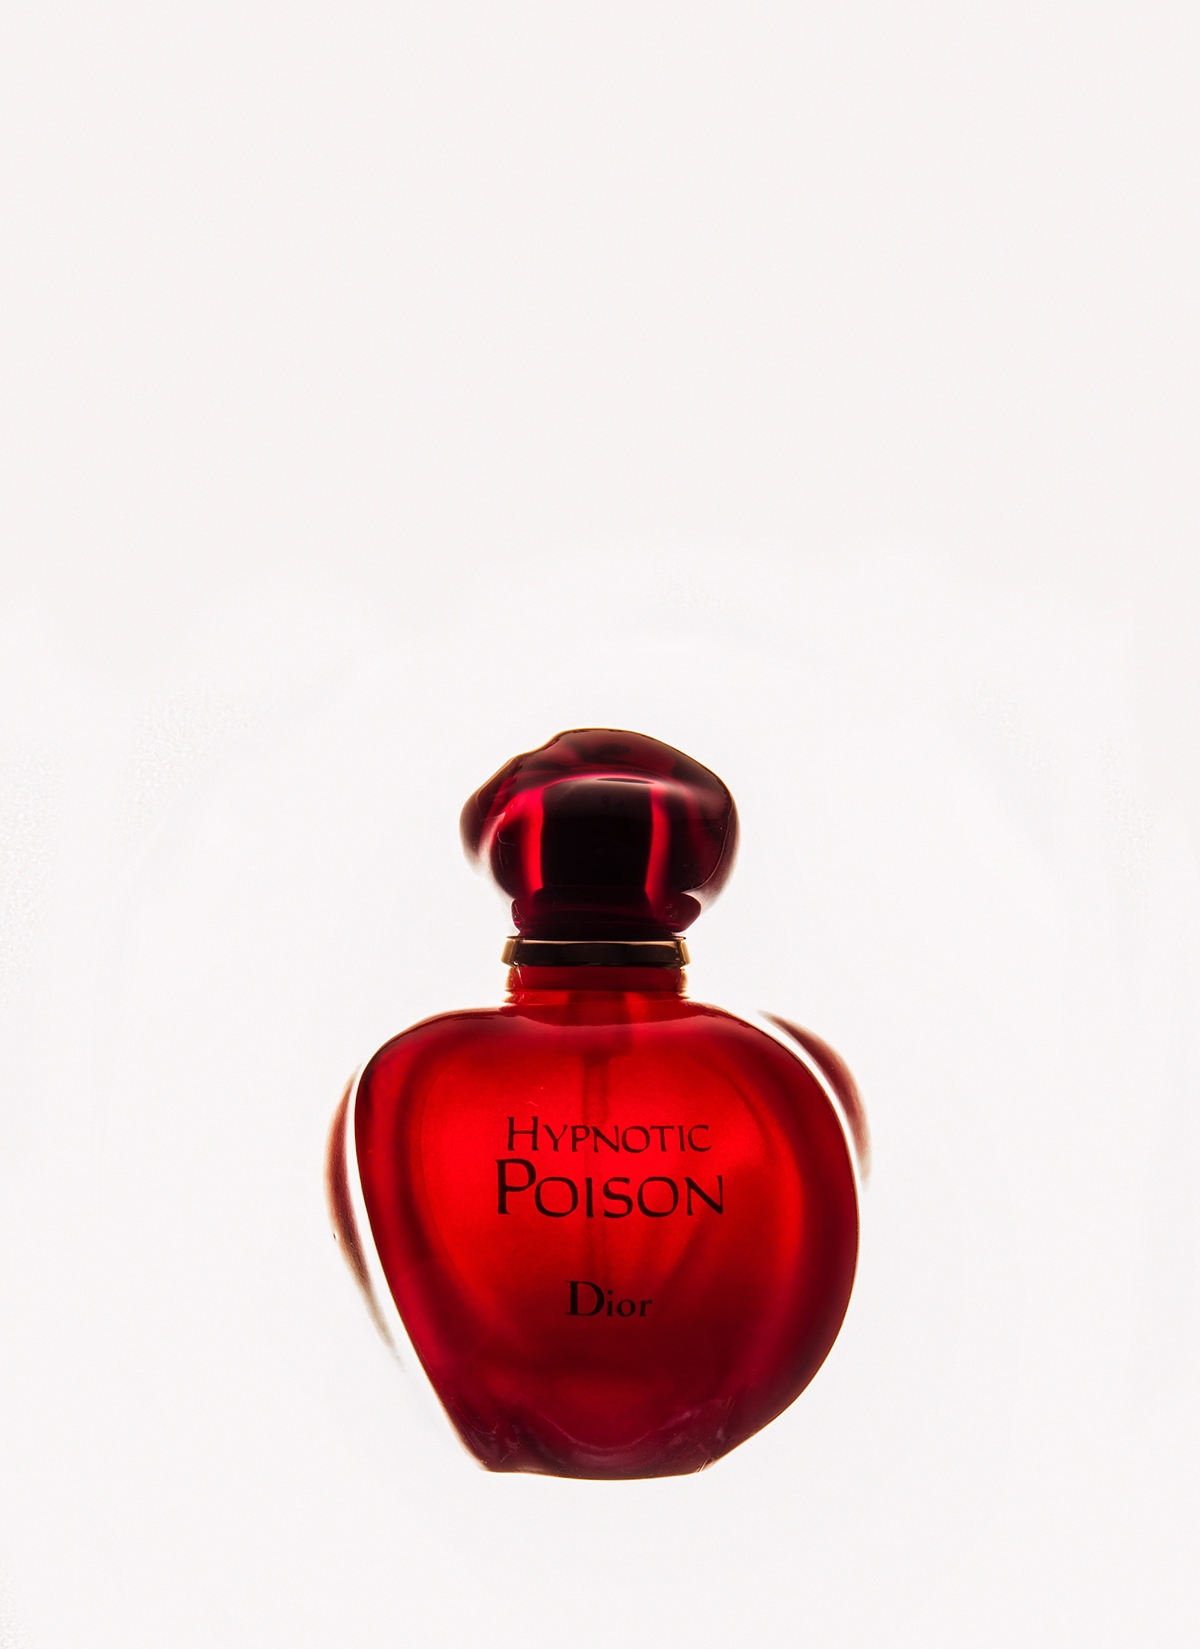 still life Product Photography Dior Perfumes Hypnotic Poison pomegranate